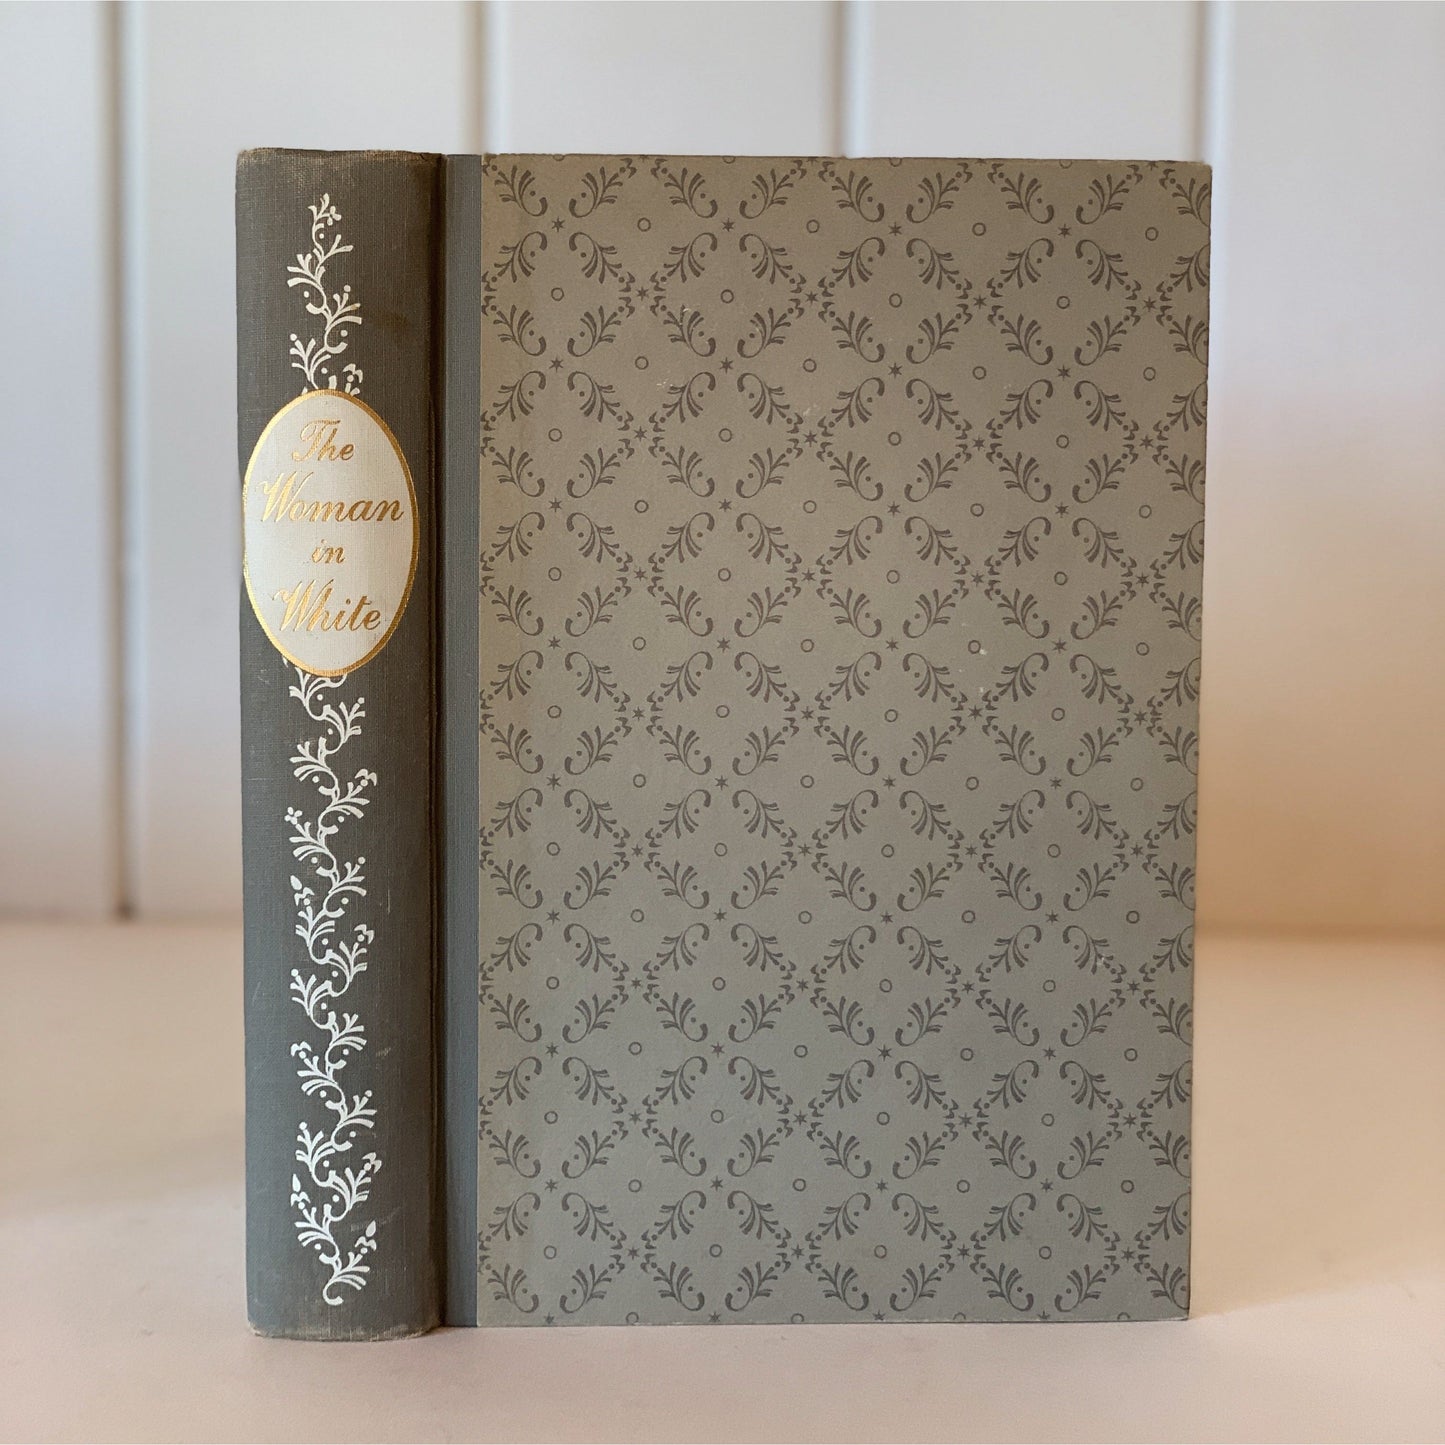 The Woman in White, Heritage Press Slipcased Edition, 1964